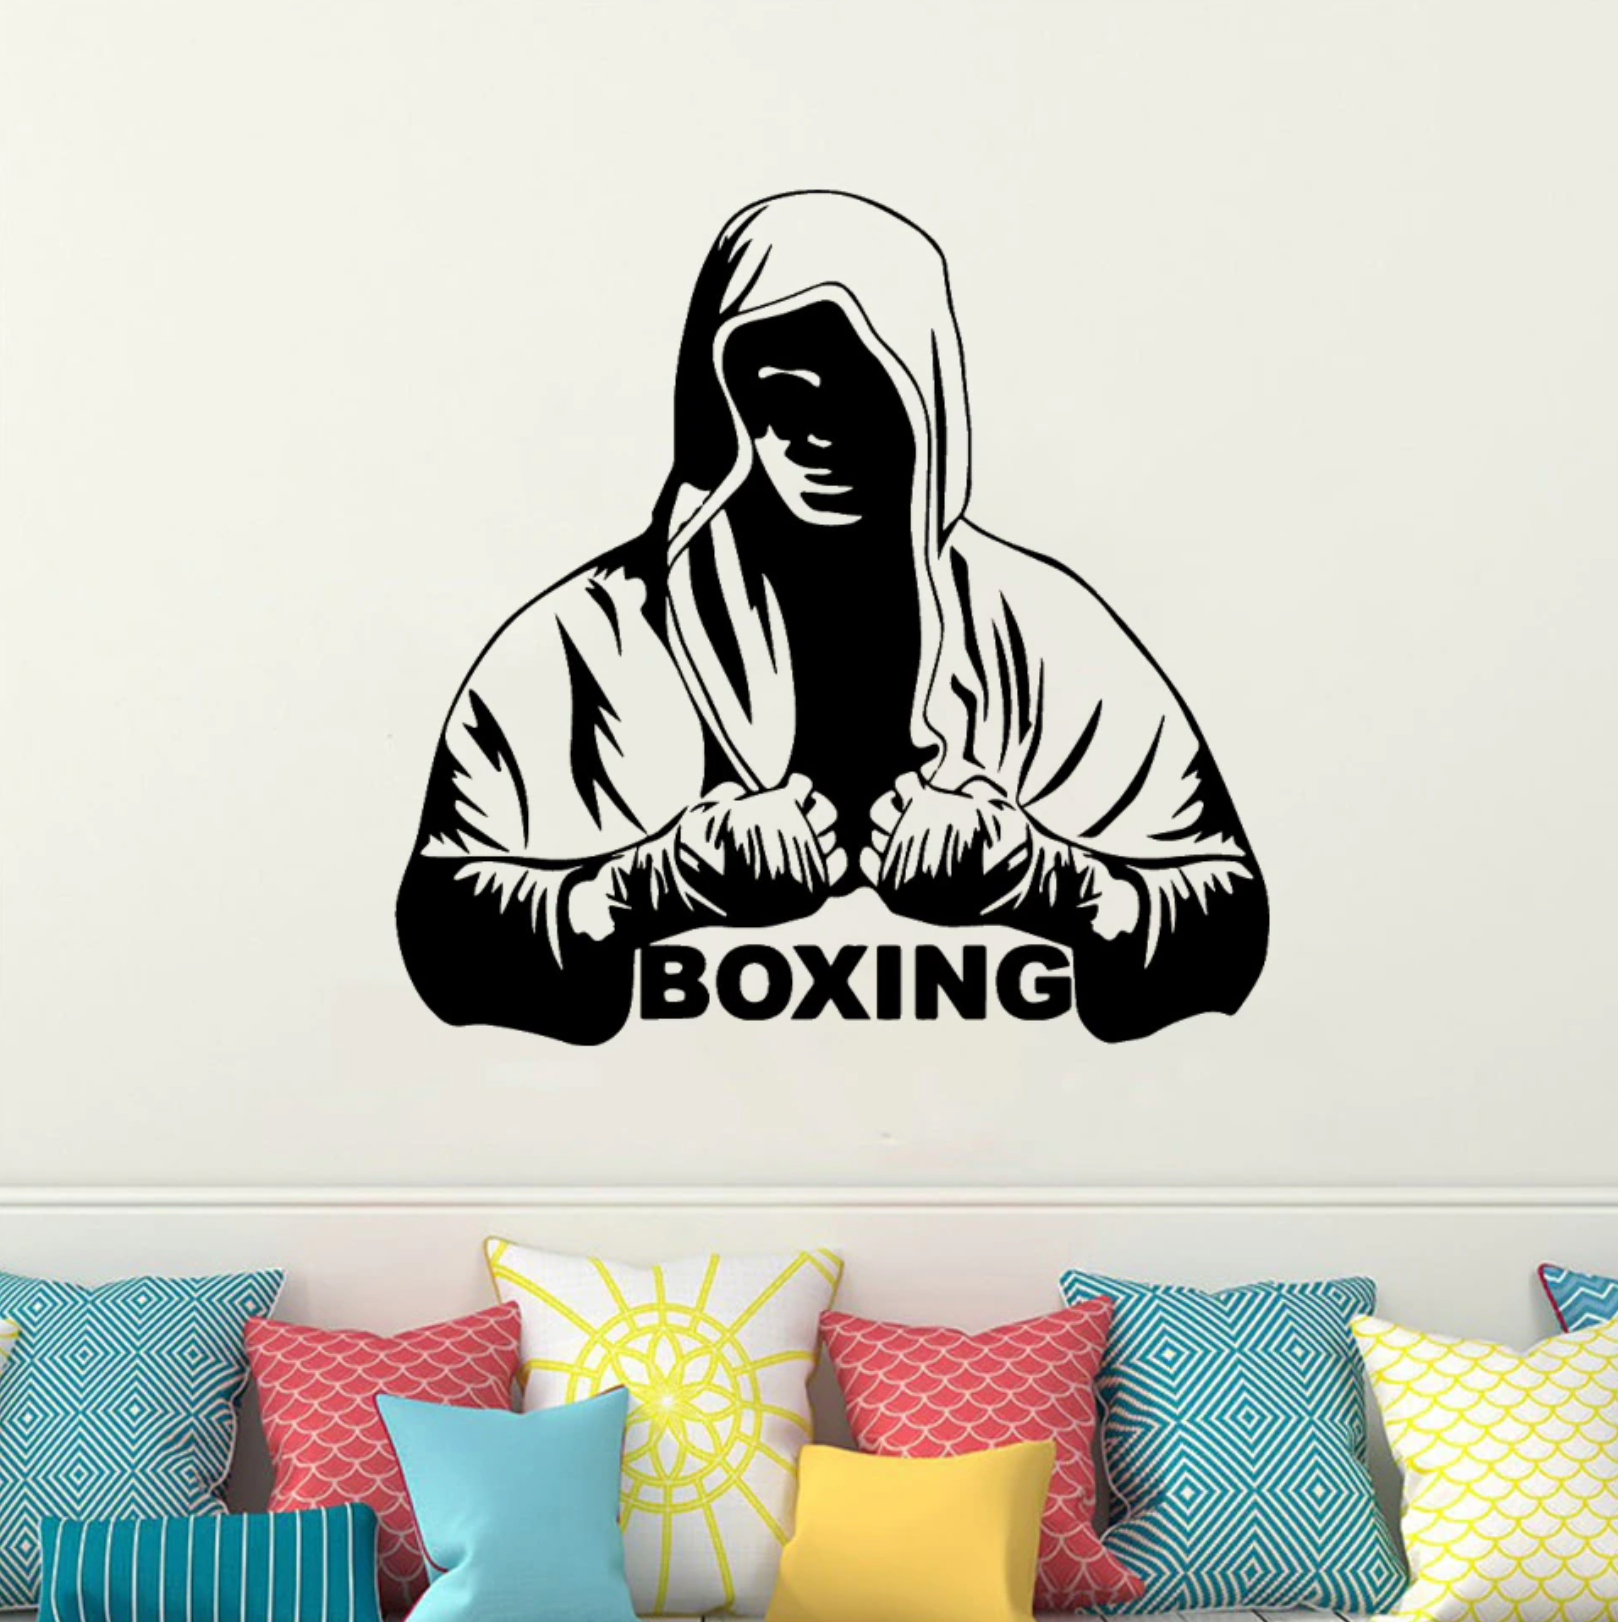 Boxing sticker - calm and ready!